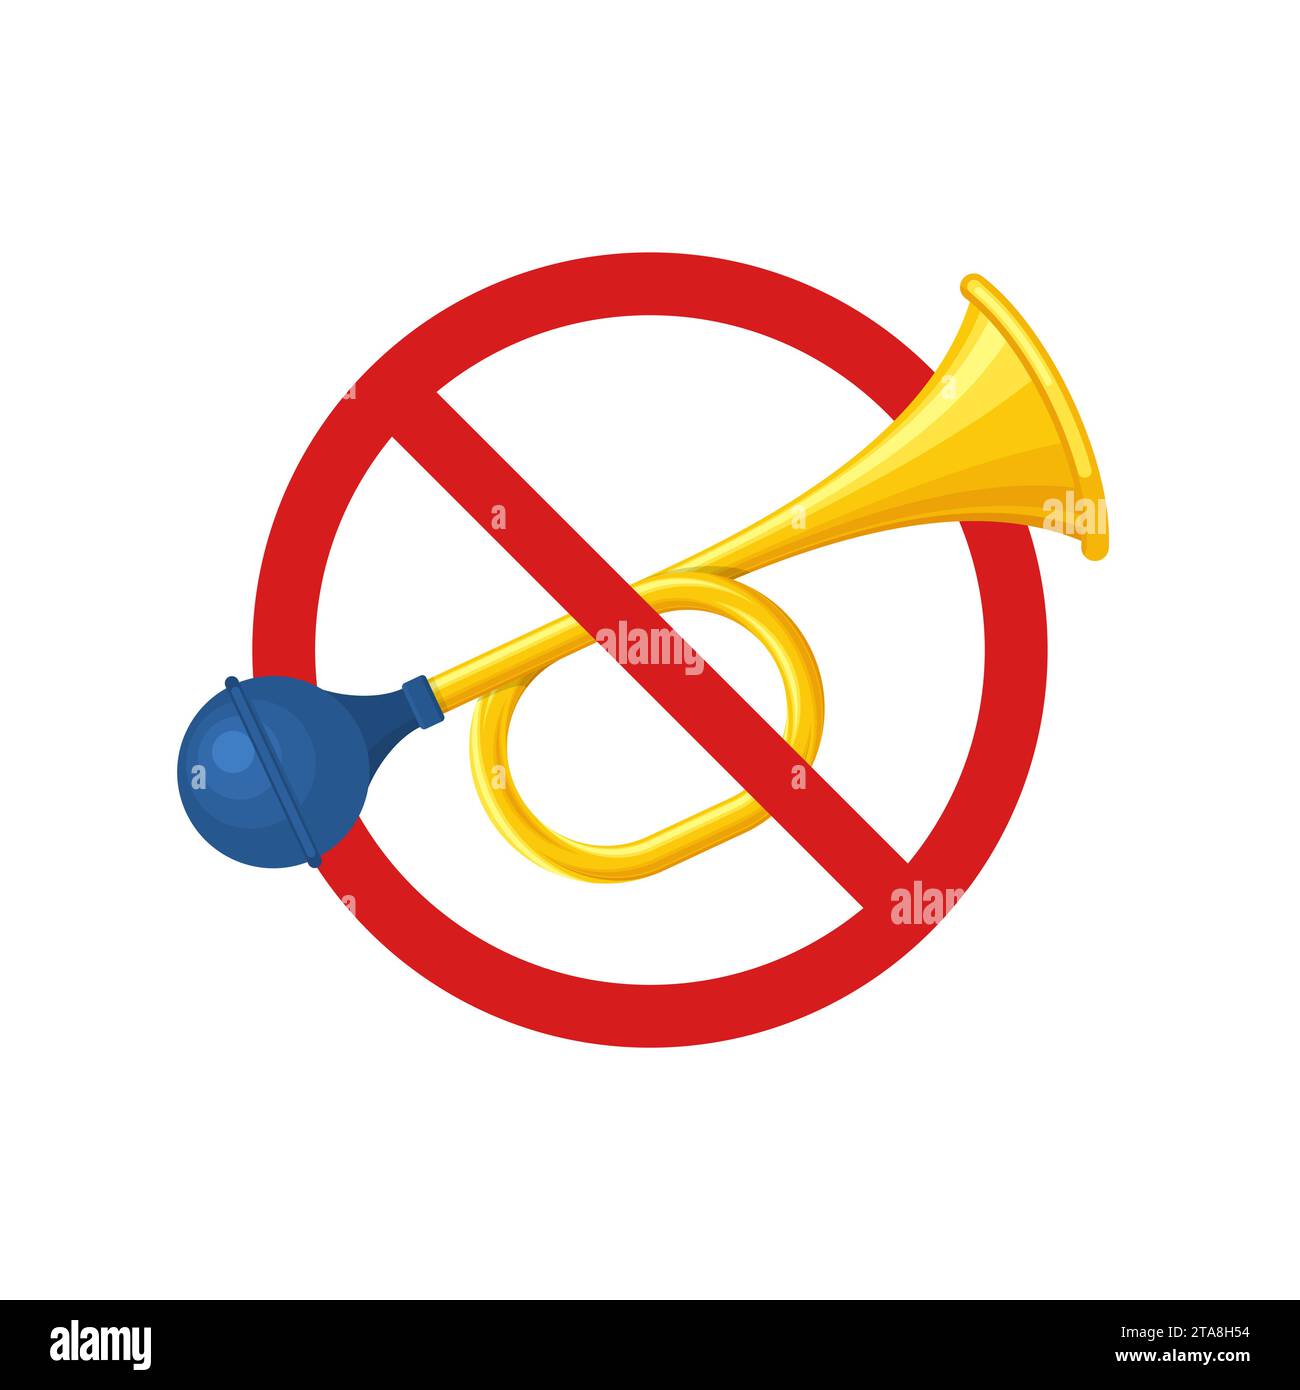 No horn road sign isolated on white background. Crossed out signal horn icon, prohibition of harsh sounds. Ban honking. No loud sound symbol. Stock Vector